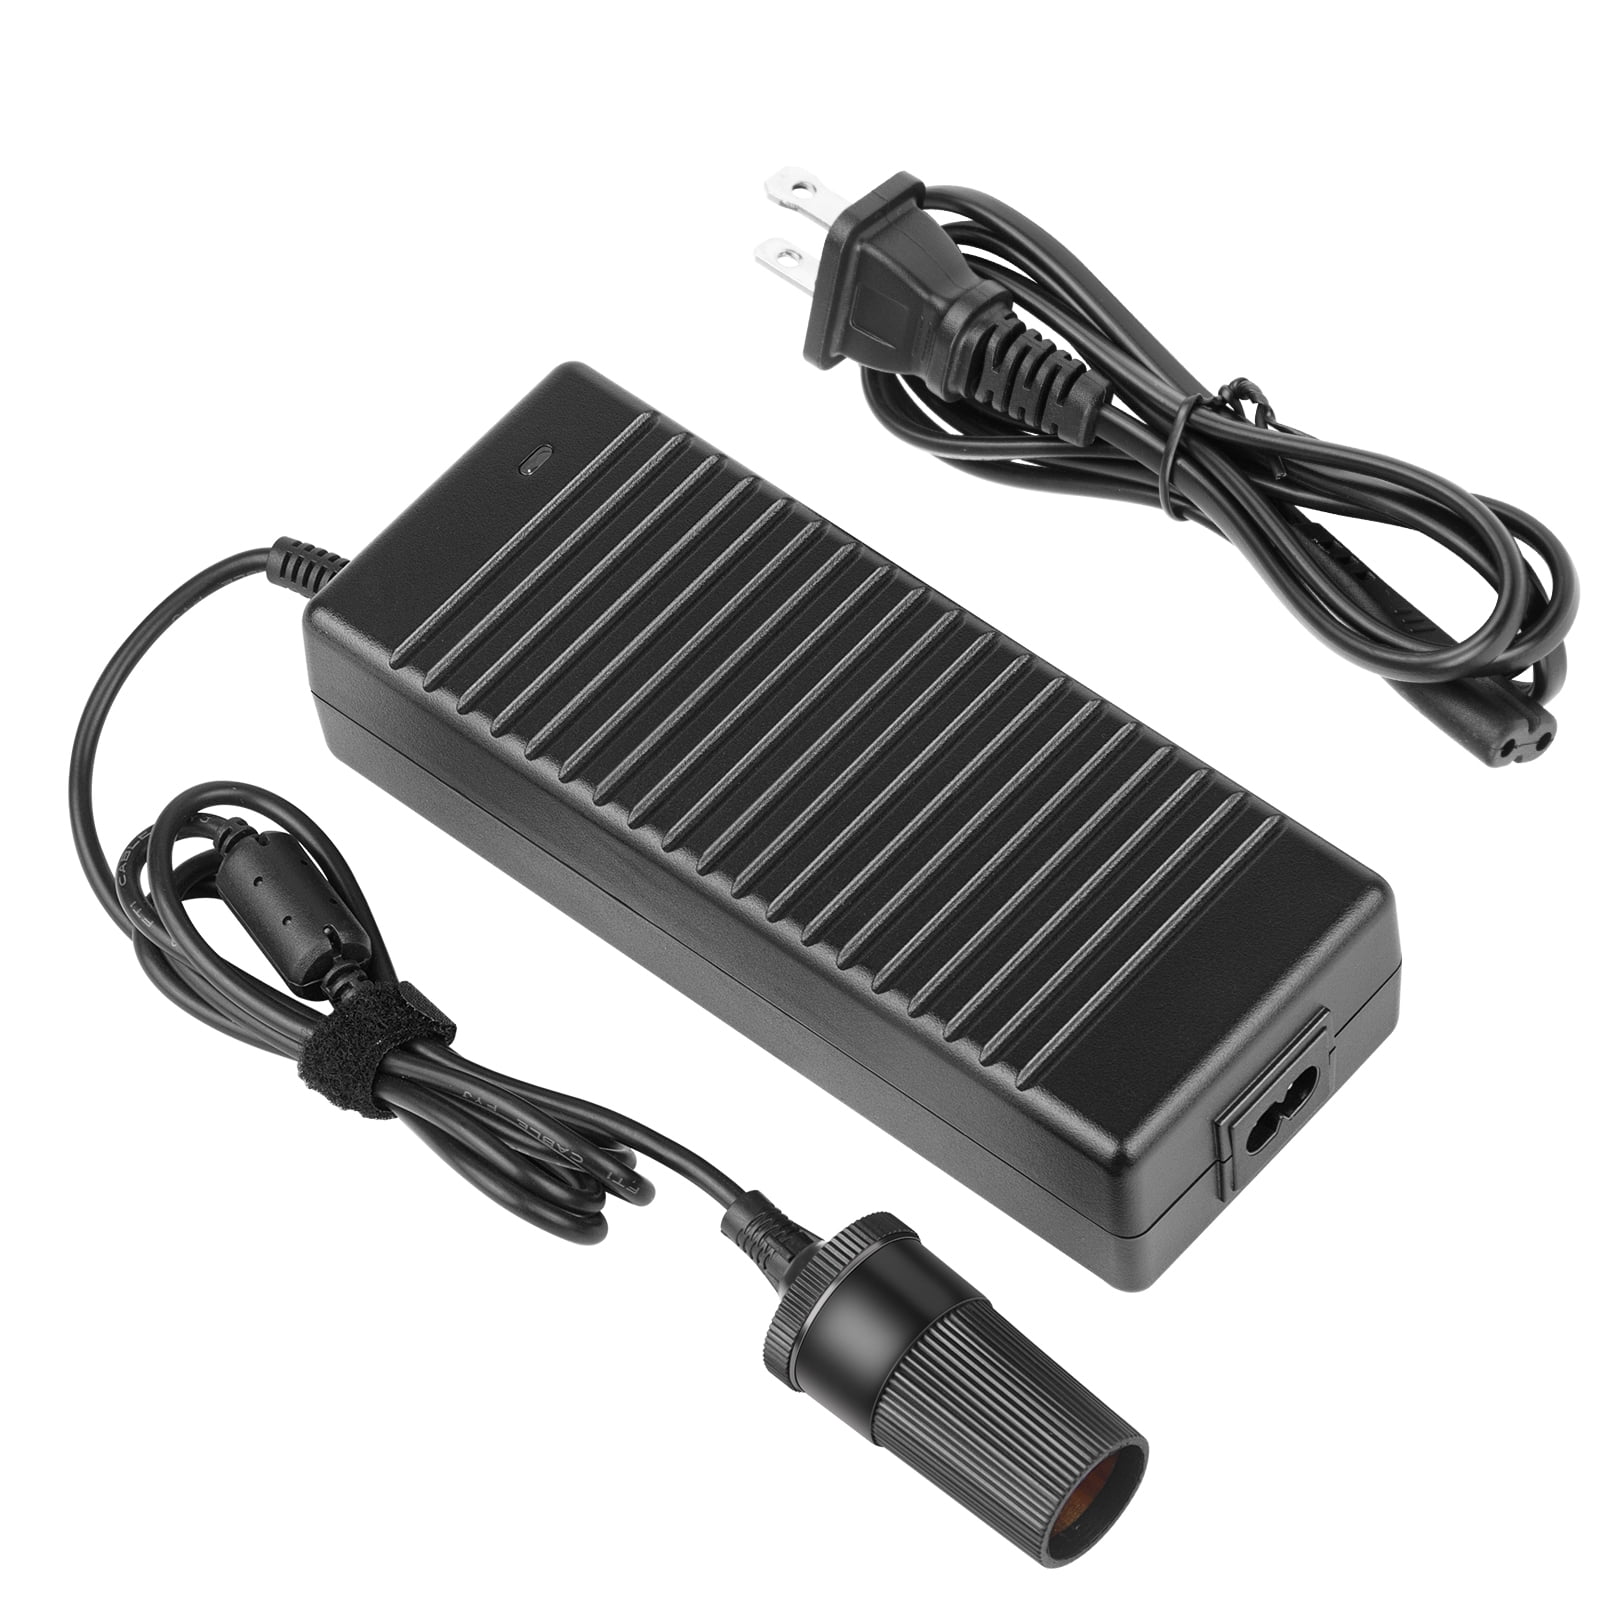 ALITOVE 12V Power Supply 6A 72W AC to DC Adapter India